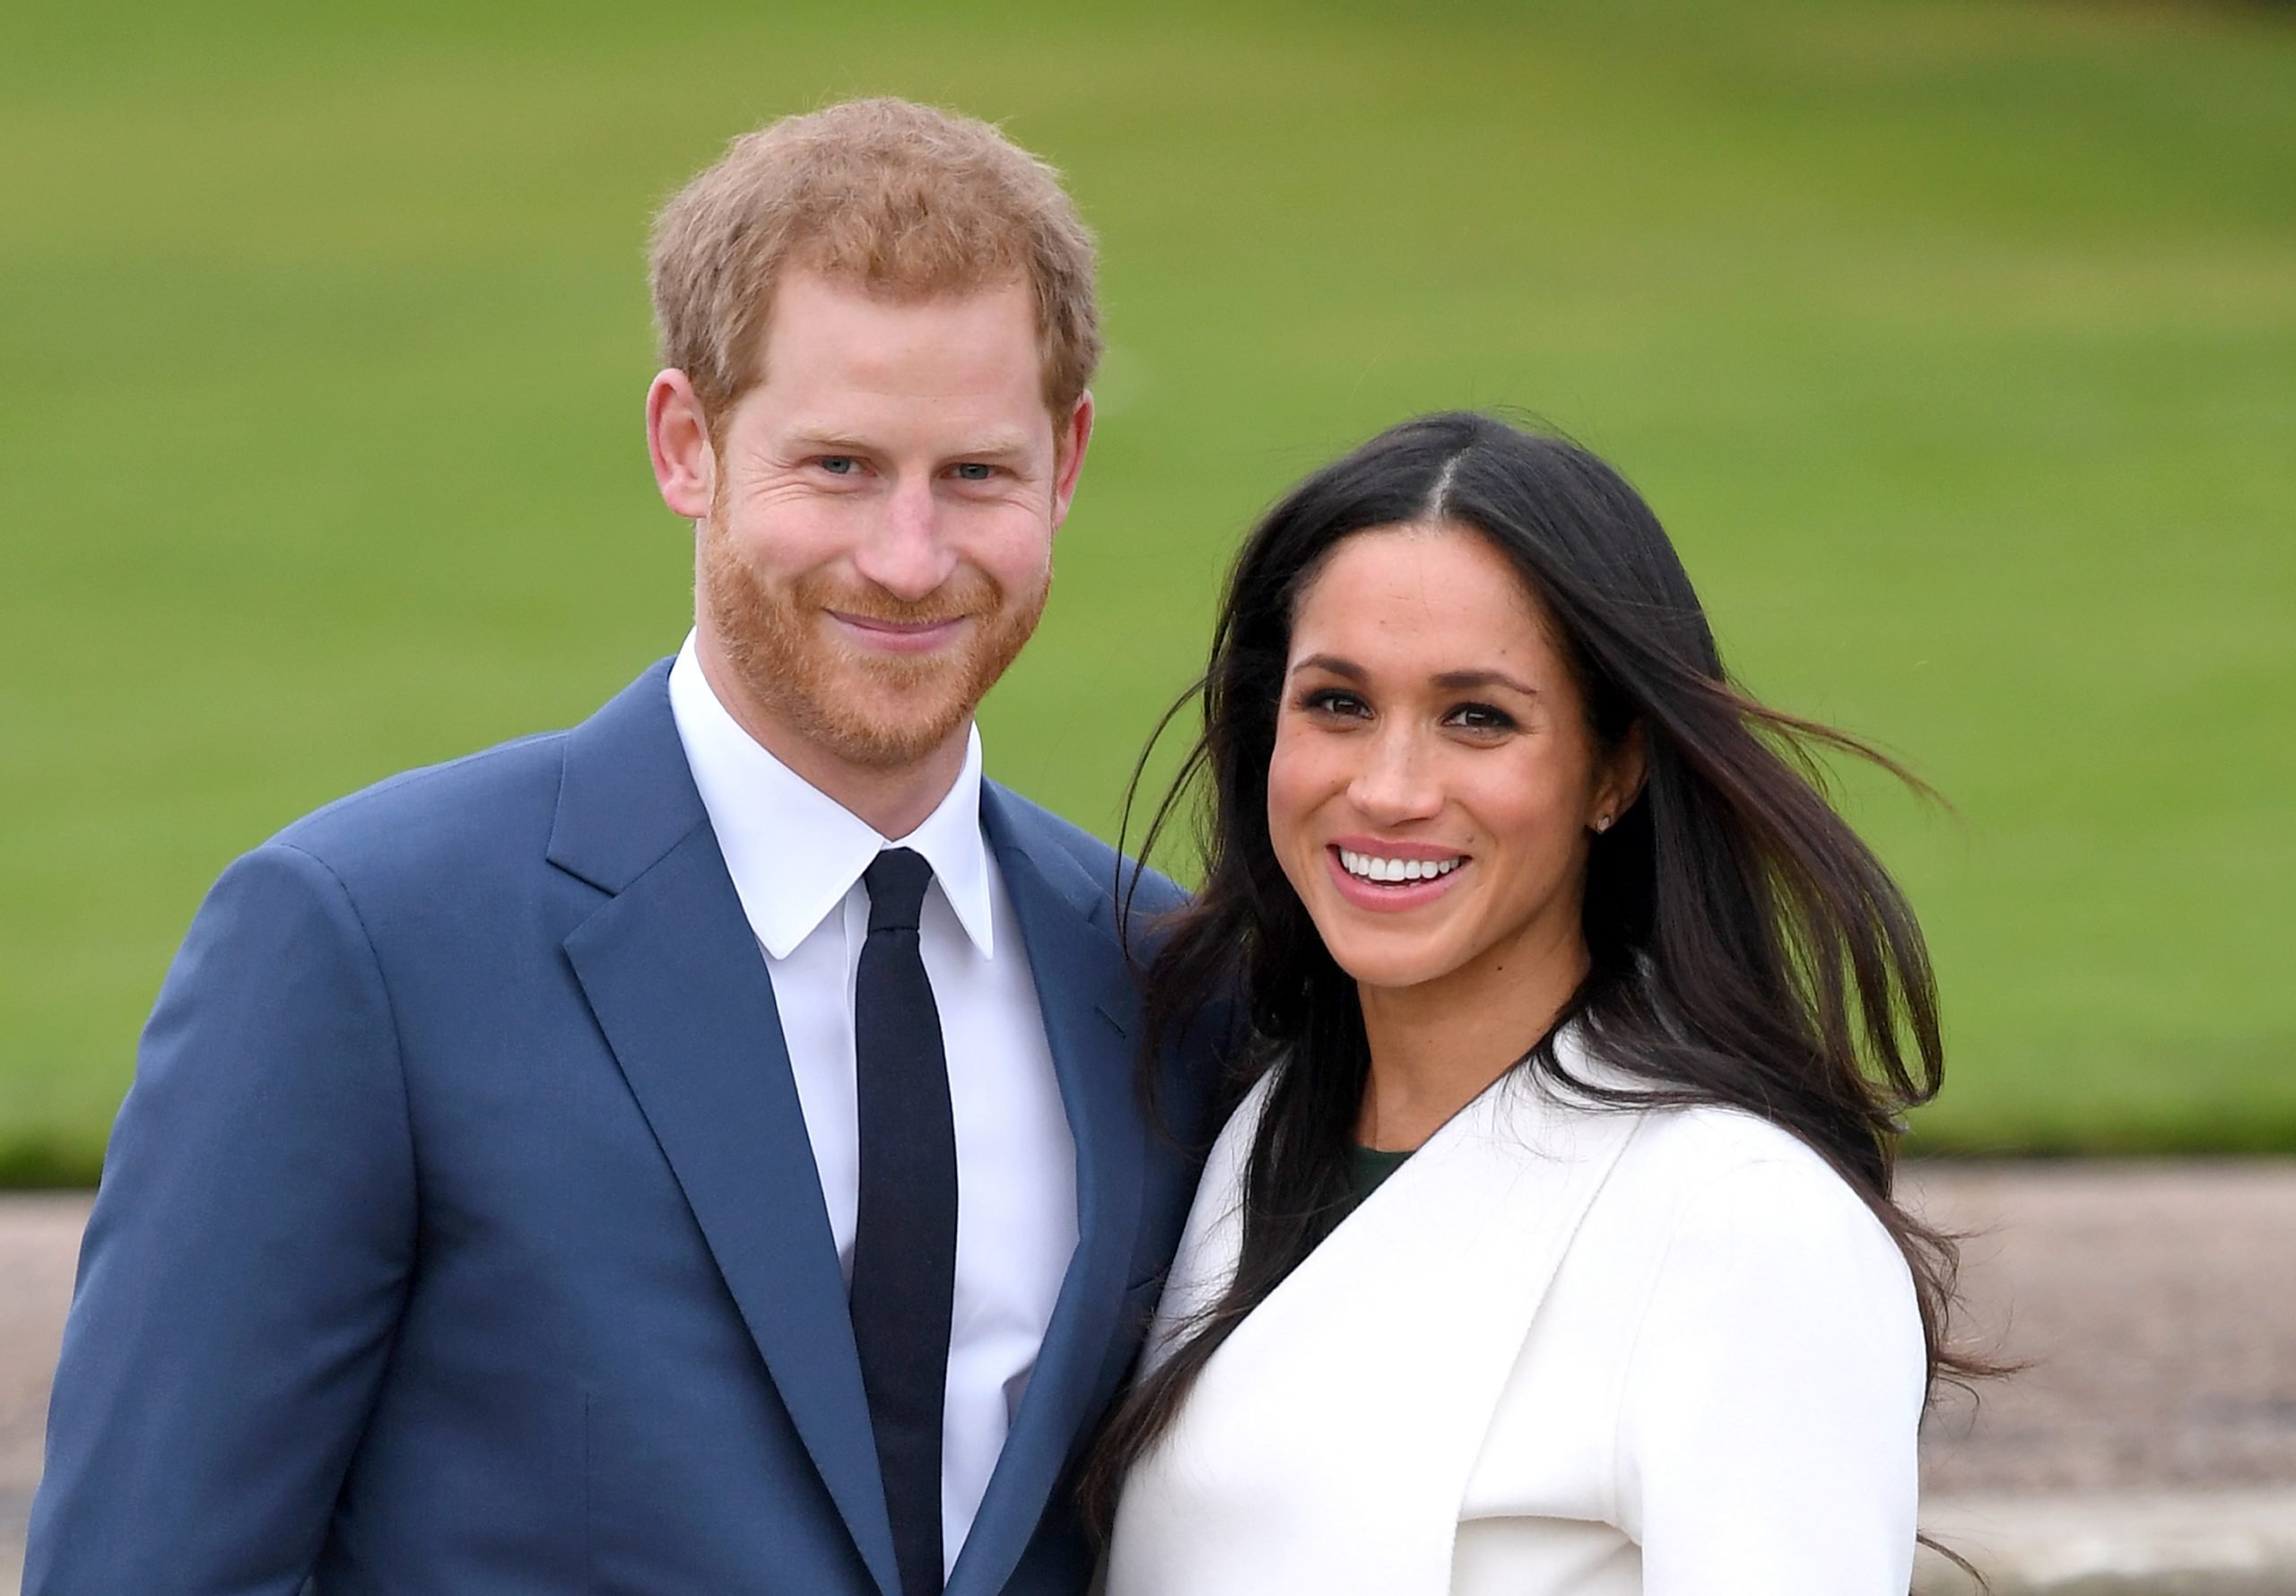 Just what connection are fans of Italy making between Meghan Markle and themselves? Look to Prince Harry's beloved England and see for yourself.